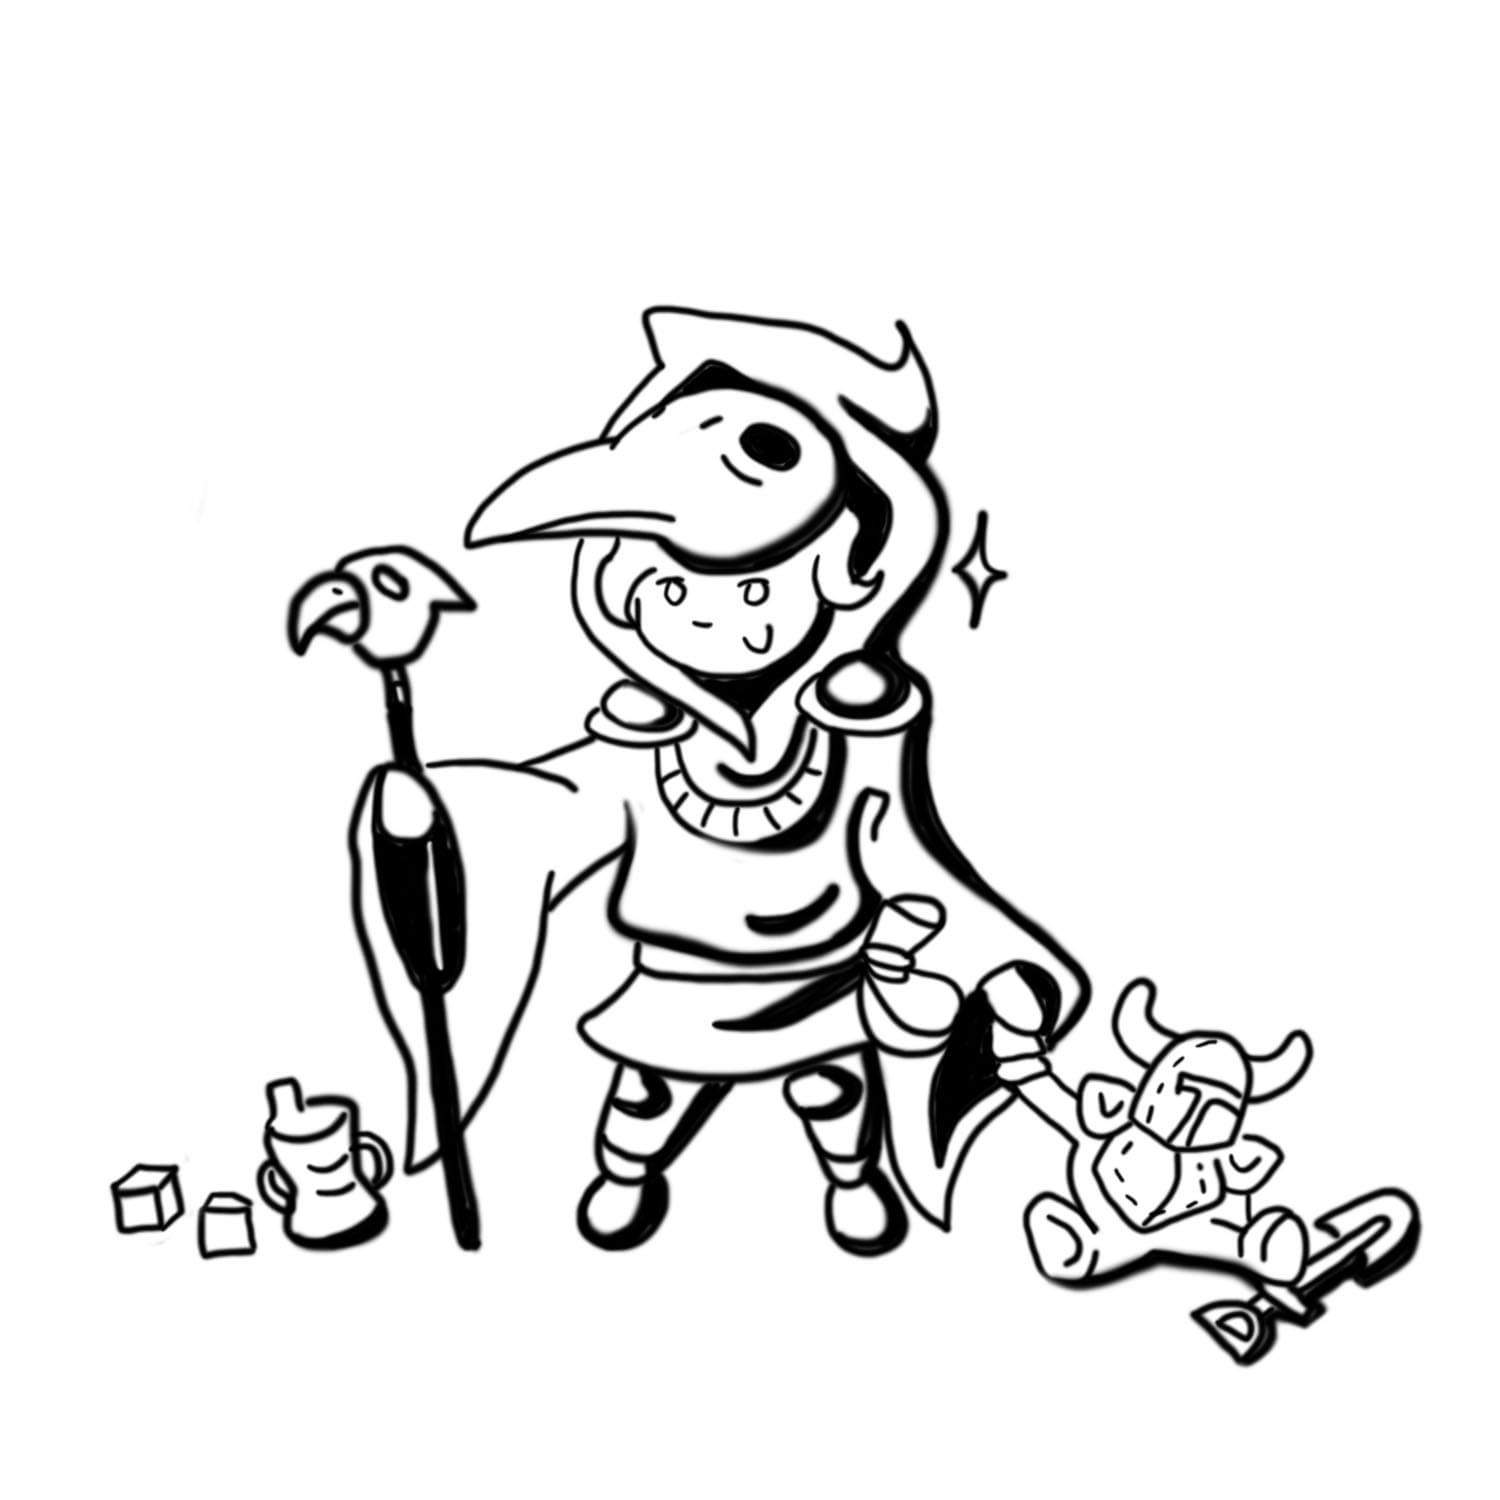 11. Cruel Baby Plague Knight is ready to cause trouble with the Order of No Quarter!